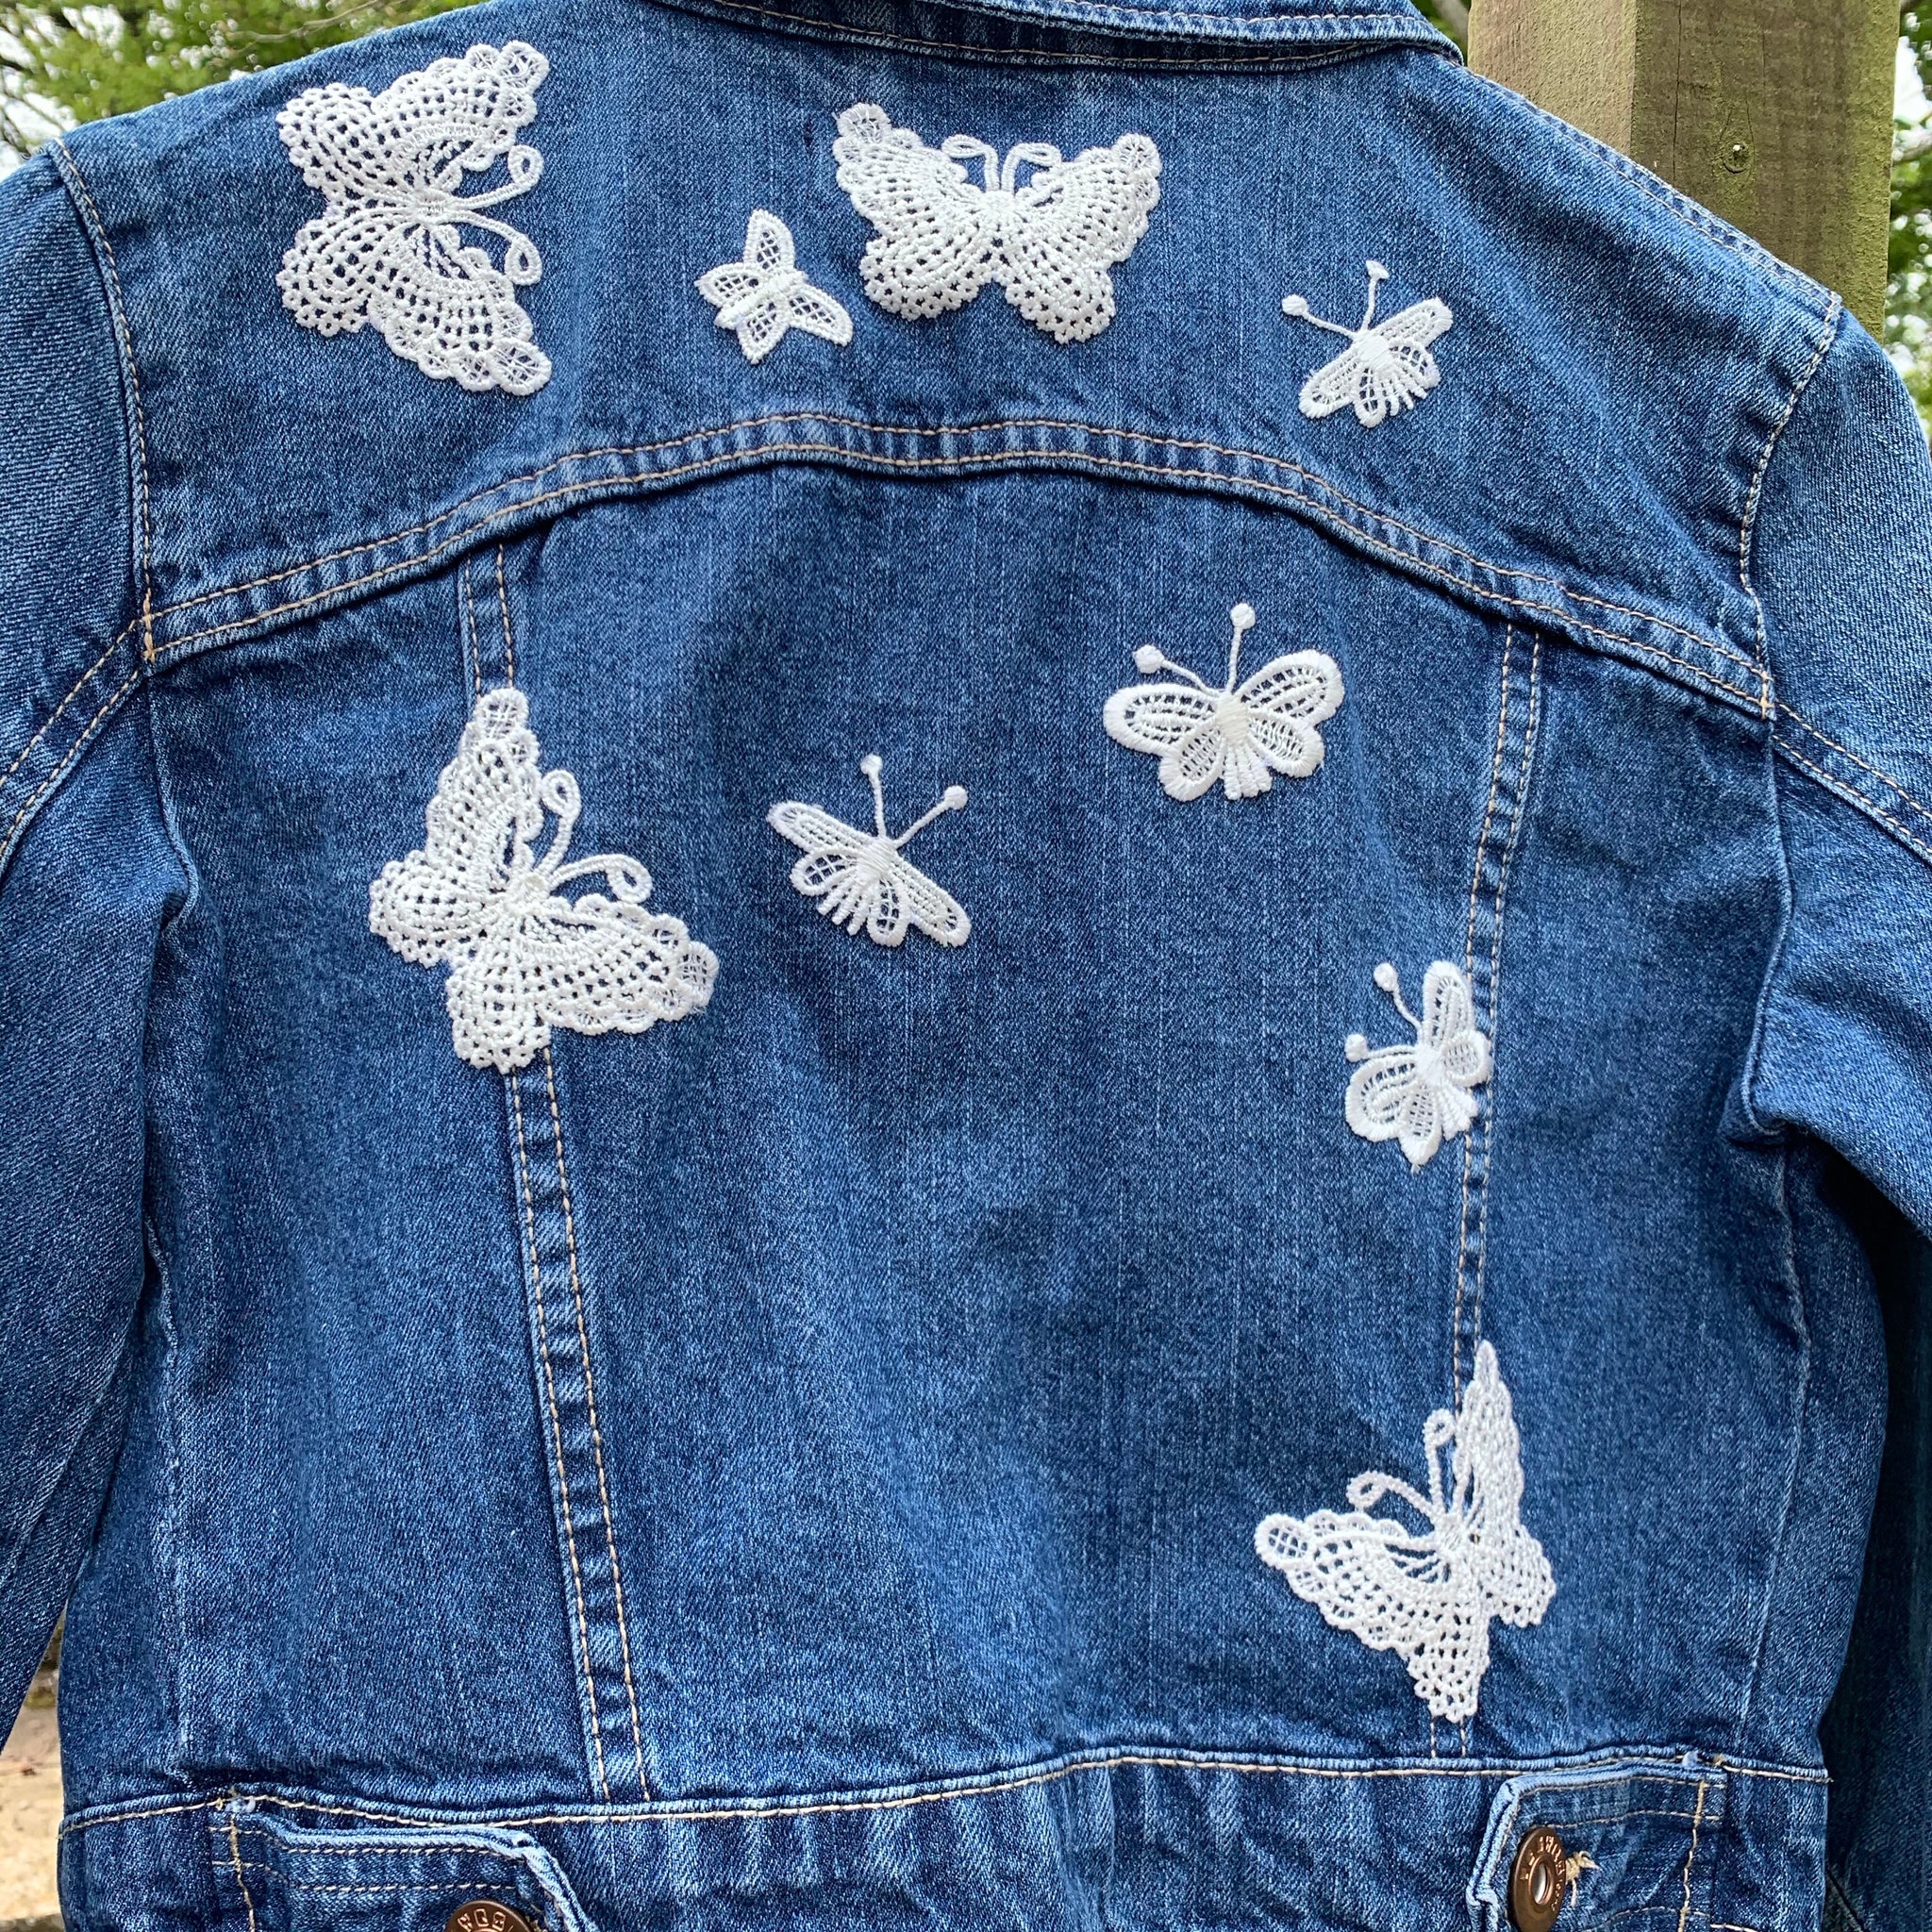 Denim jacket with butterfly embellishments